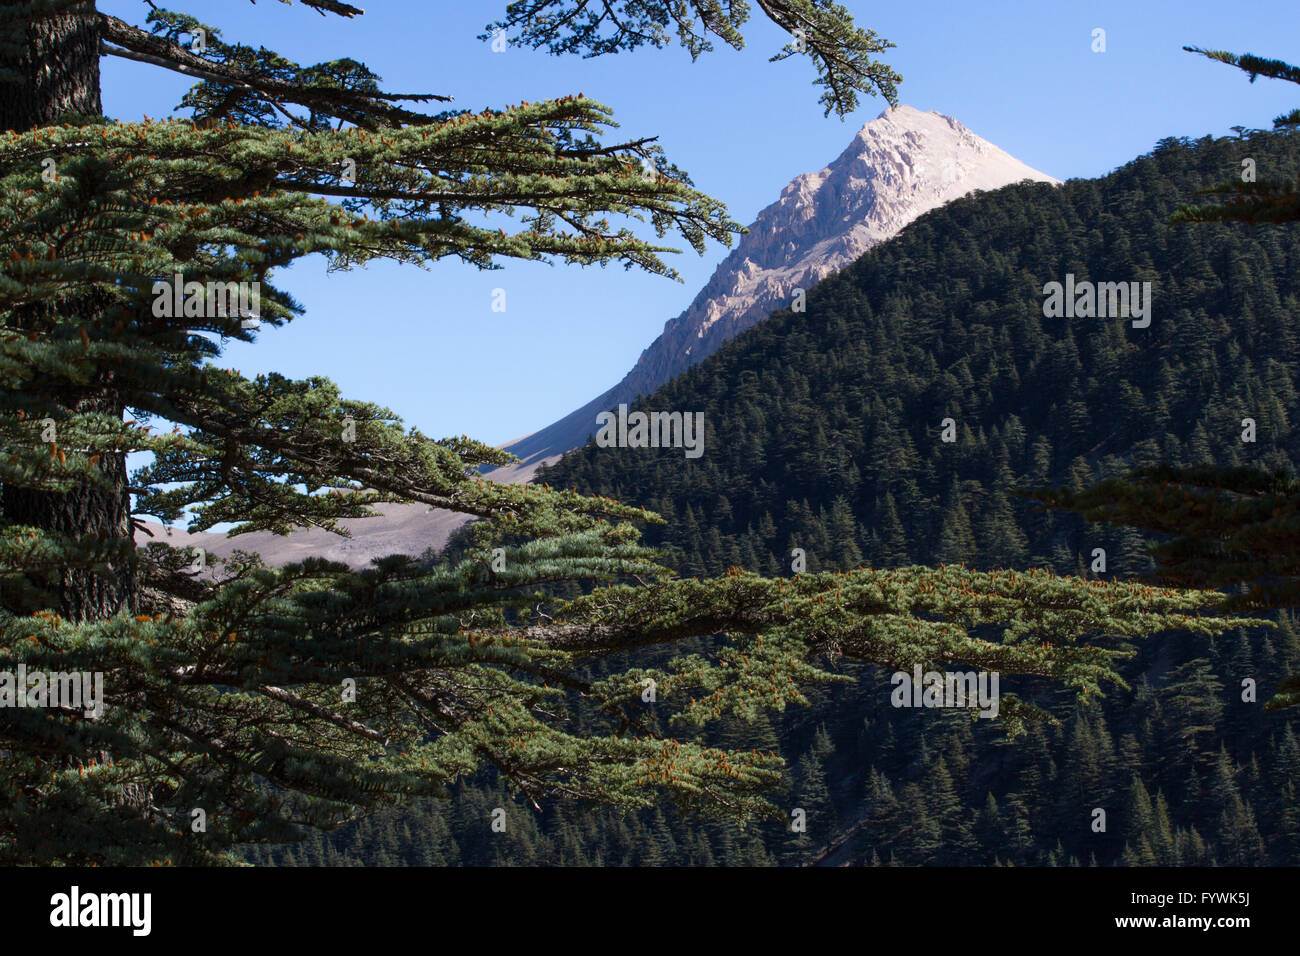 Lebanese cedar pinecone in the forest in the mountains, Turkey Stock Photo